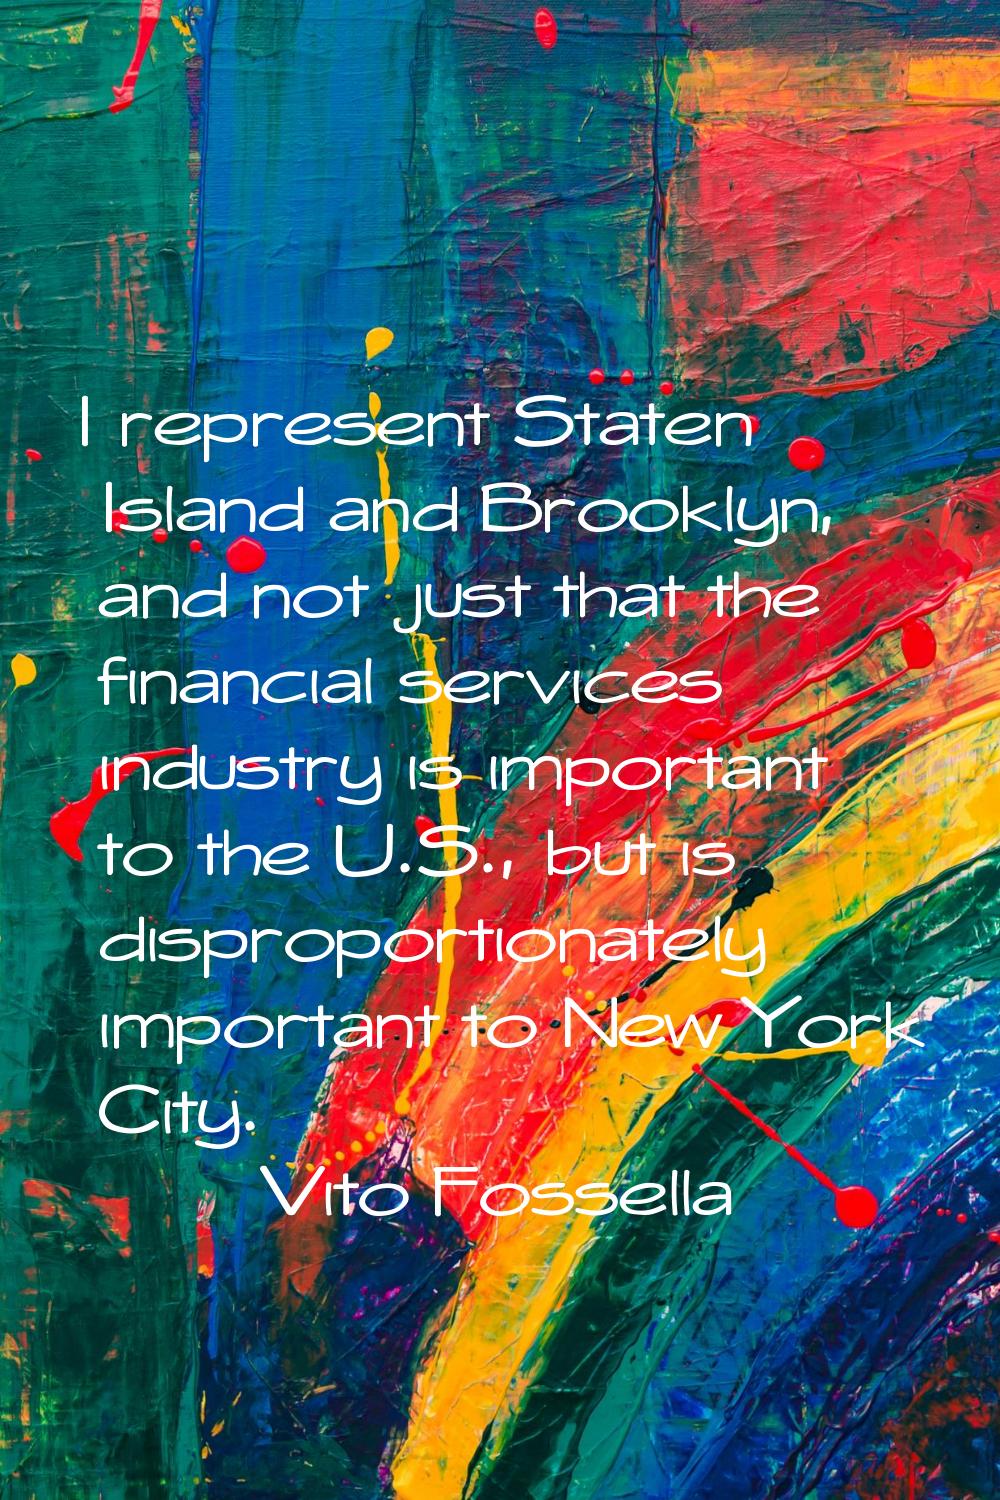 I represent Staten Island and Brooklyn, and not just that the financial services industry is import